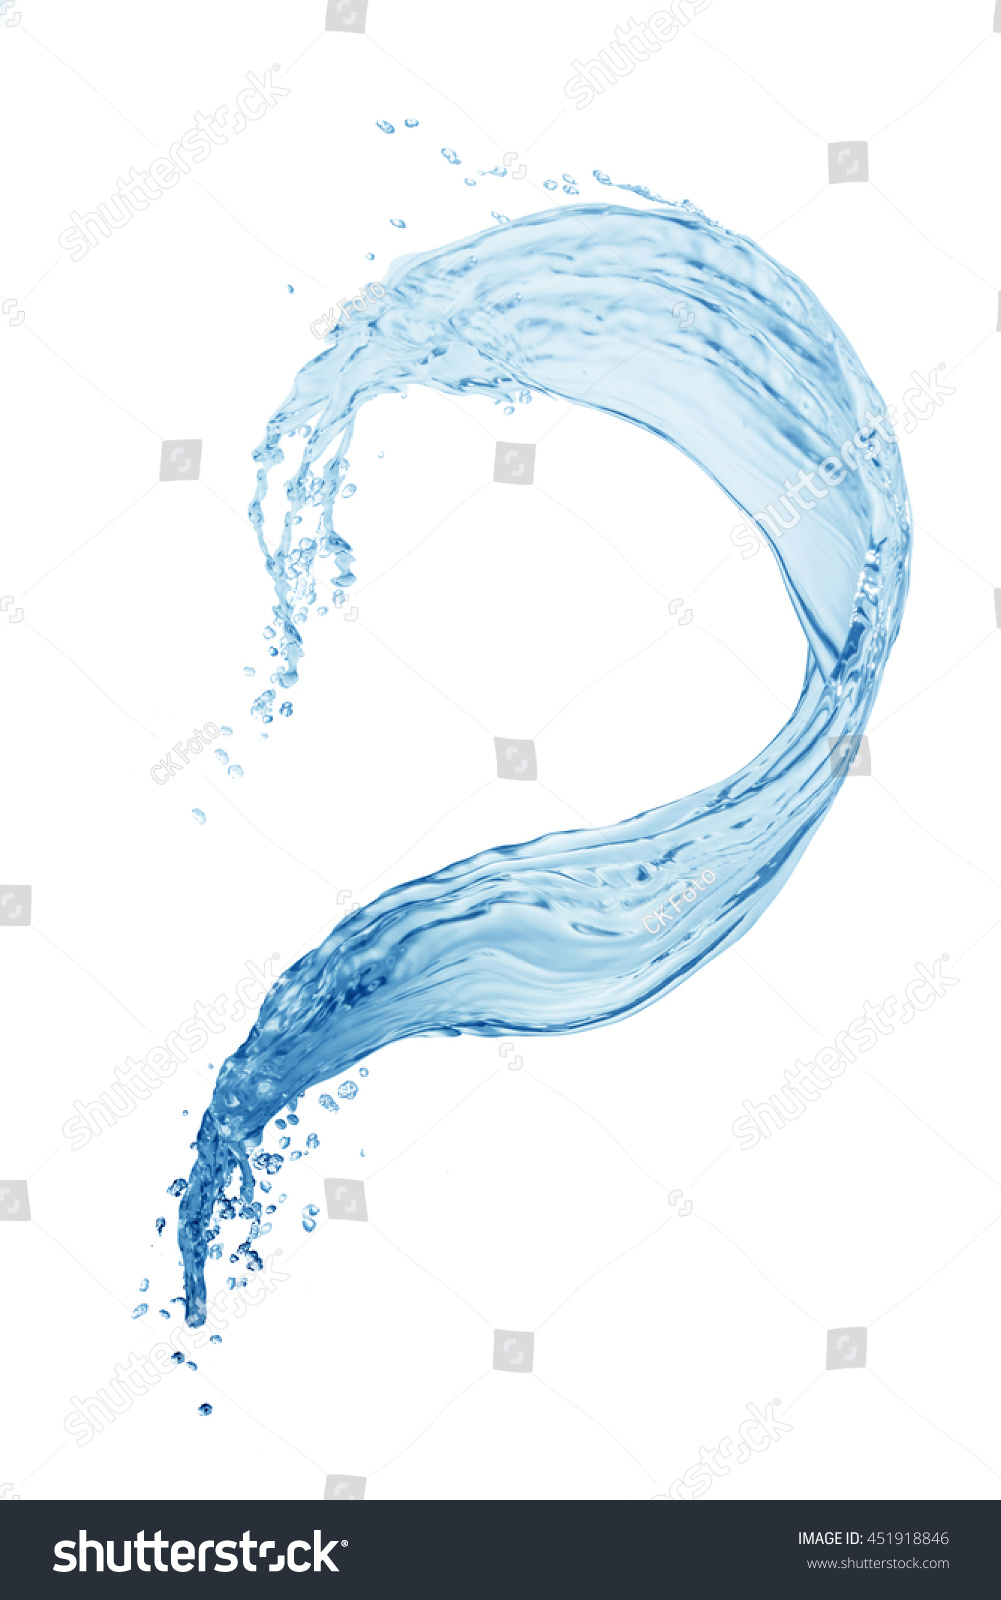 Water,water splash isolated on white background

  #451918846